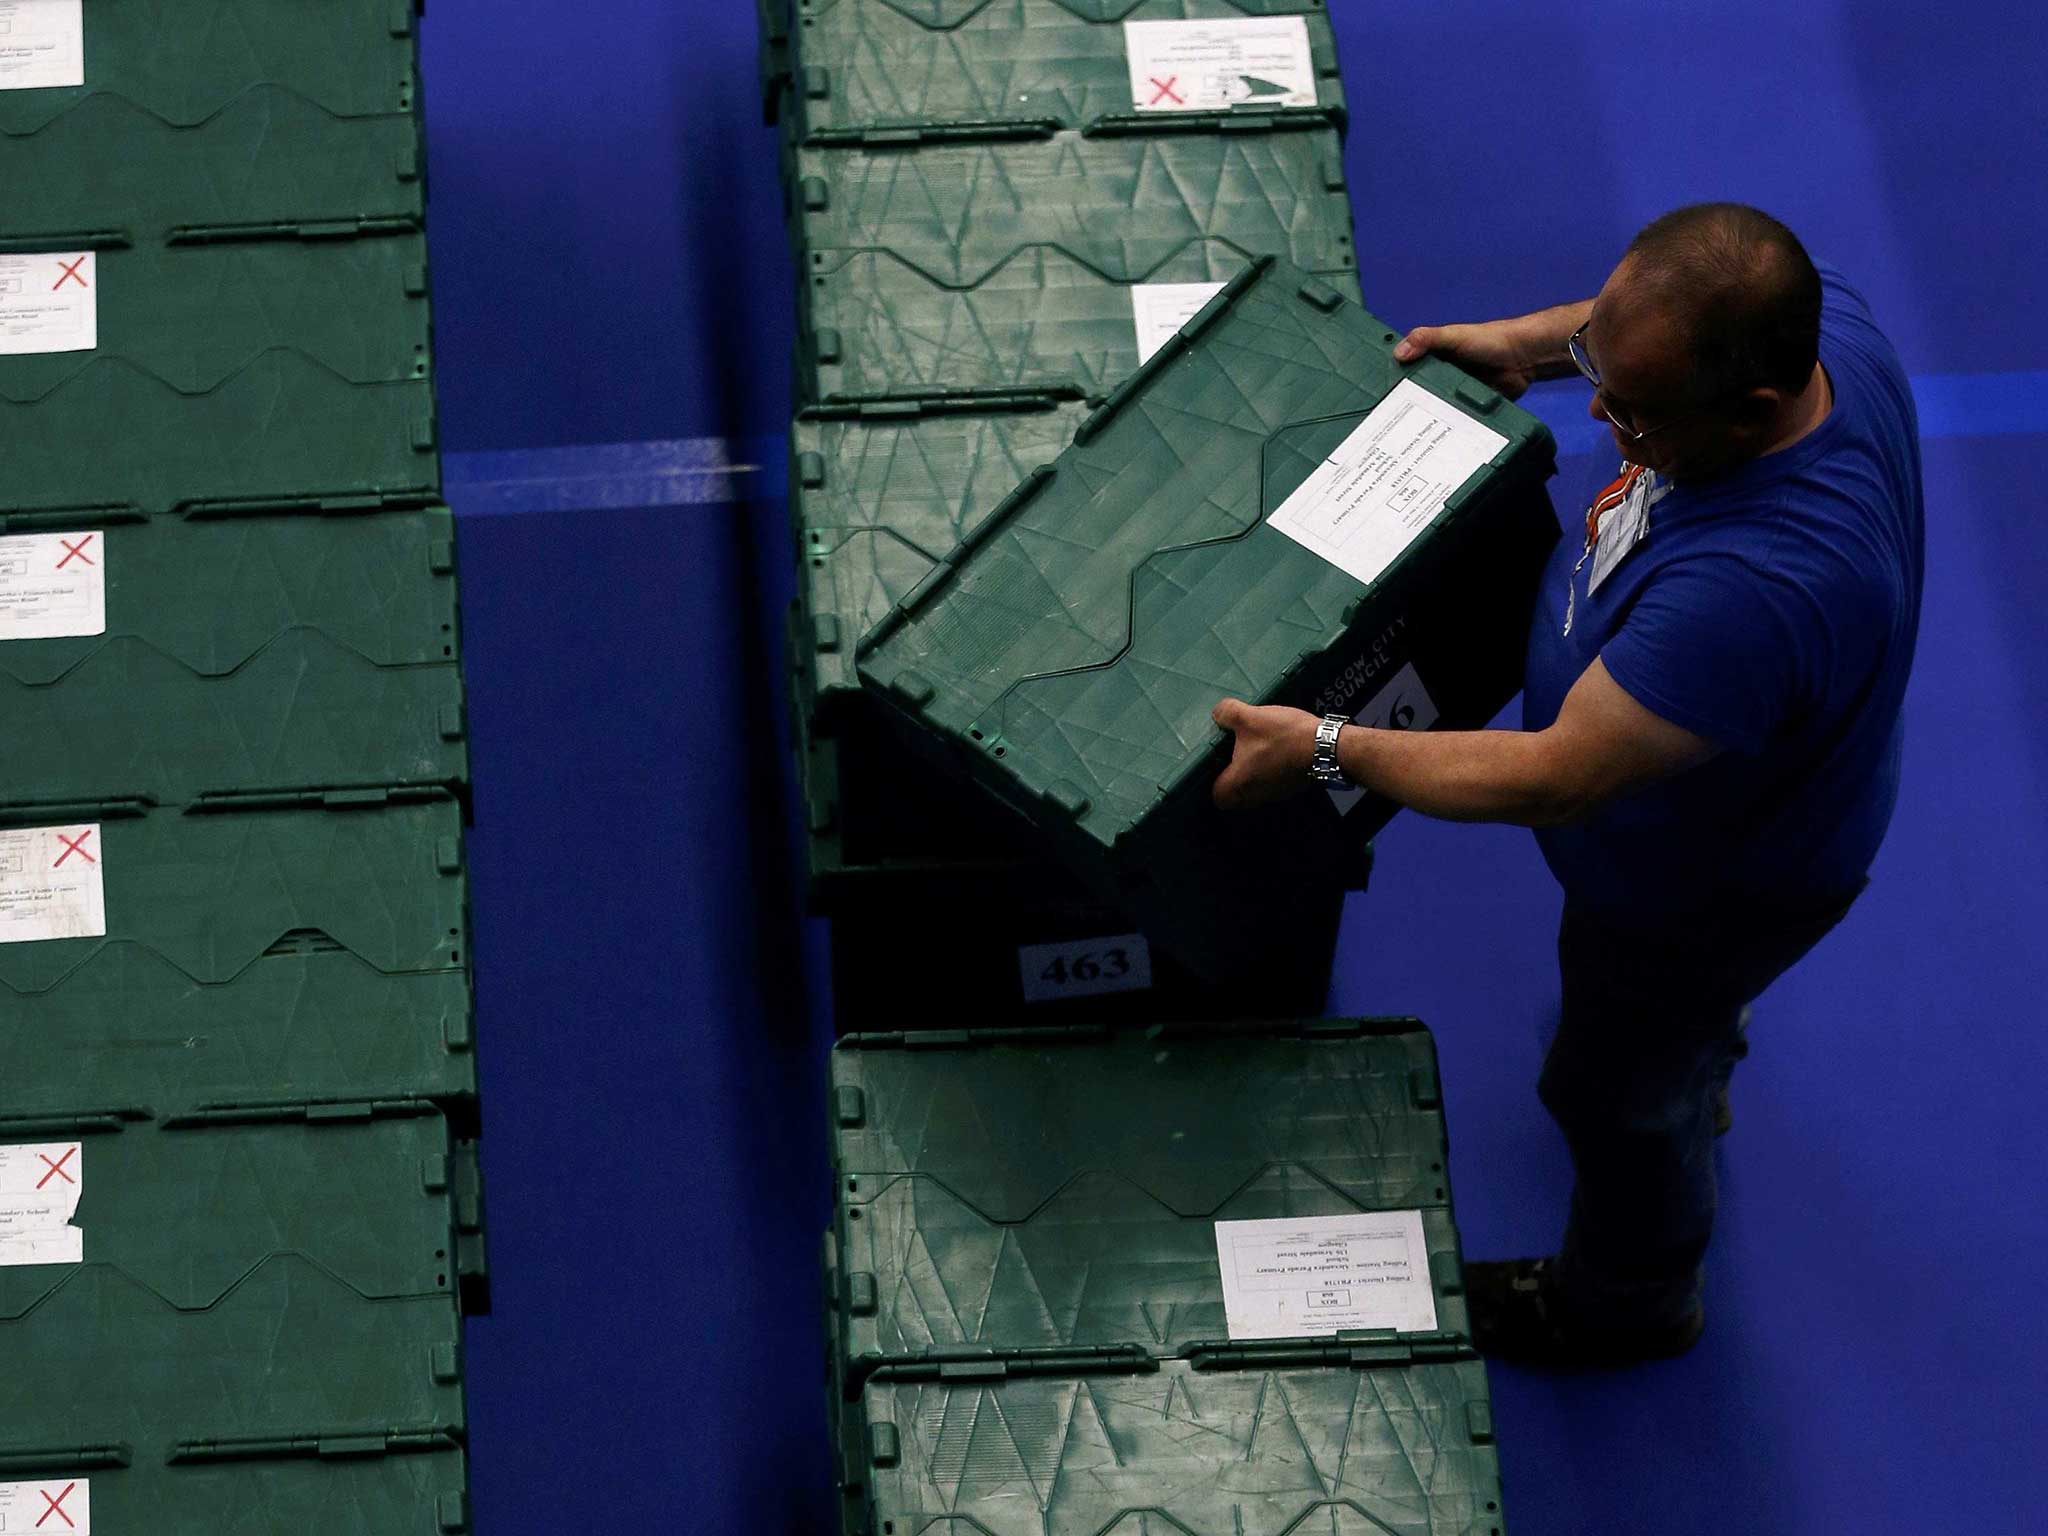 Missed two? A council was forced to issue a recount after discovering two ballot boxes after announcing the winner